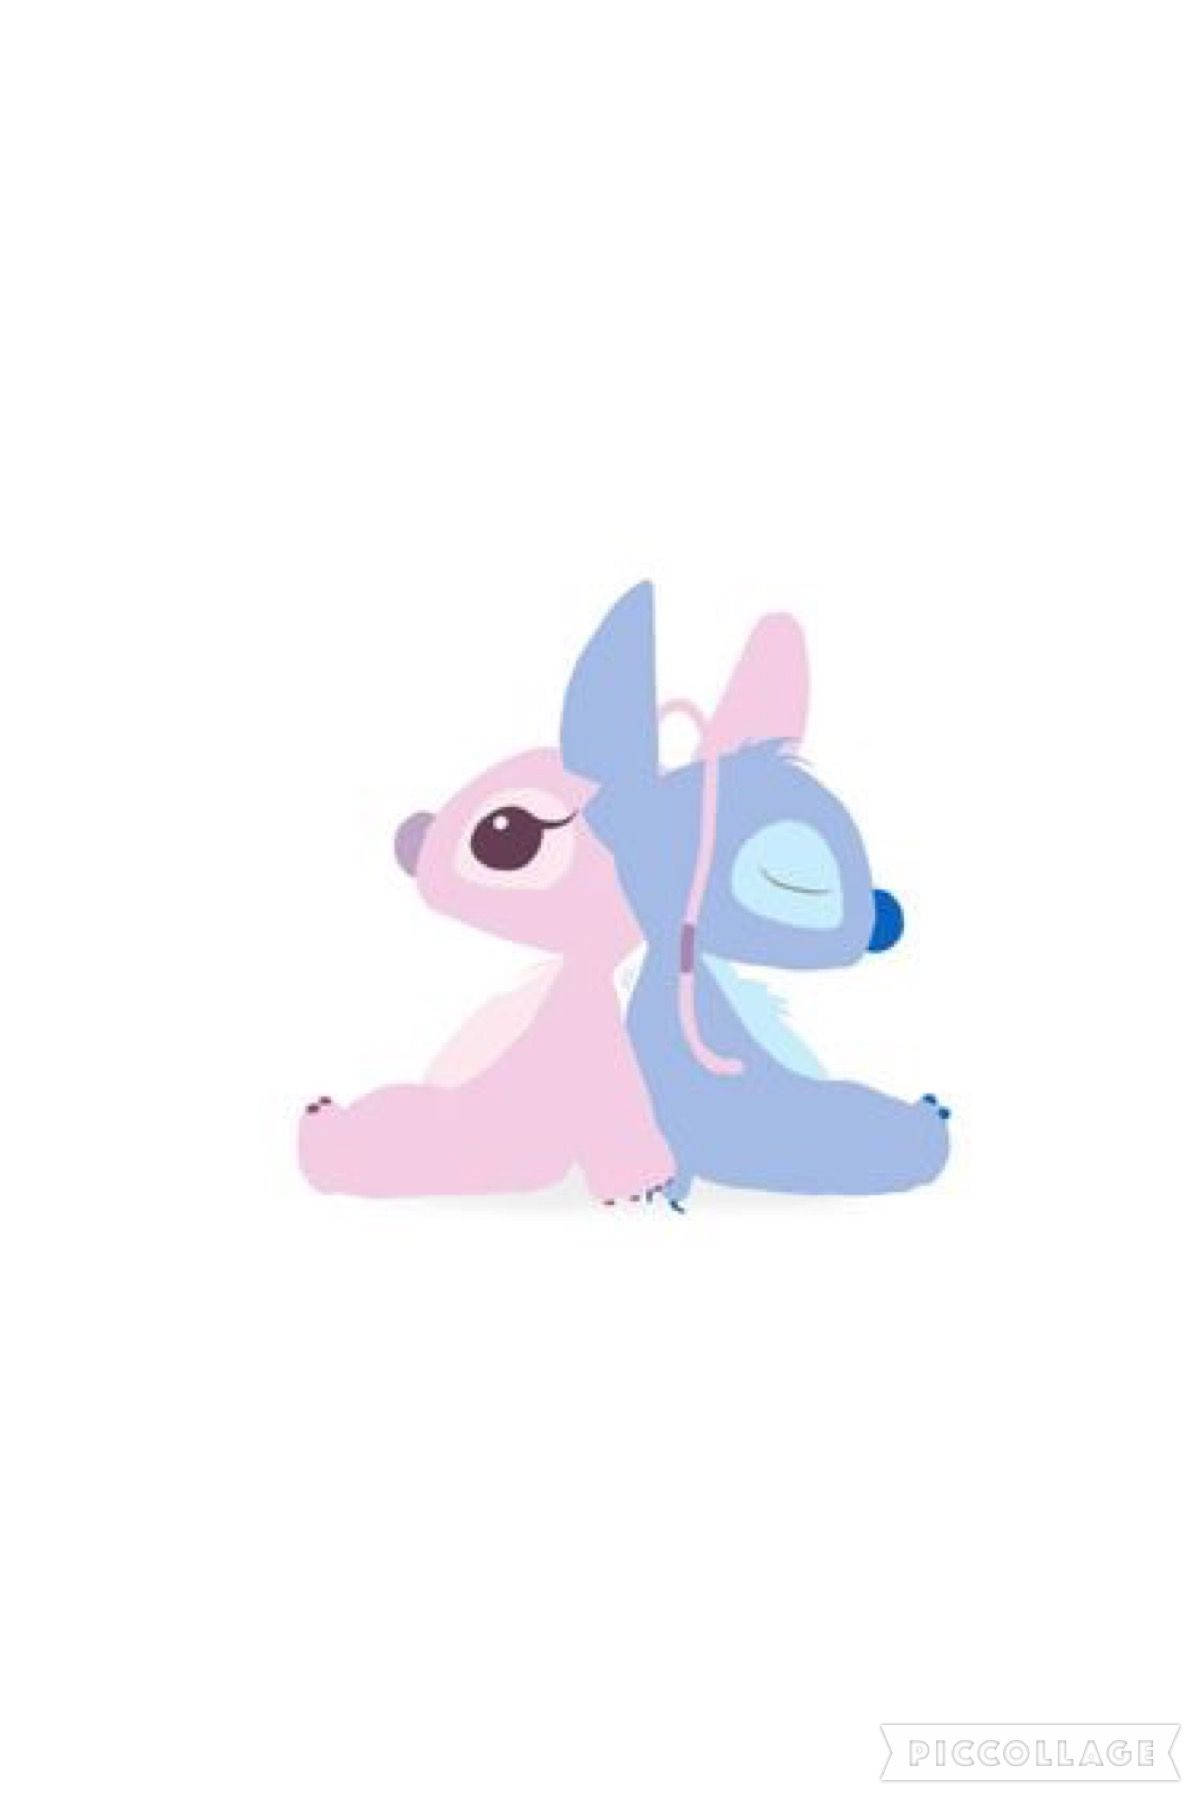 Two Cute Animals With Pink And Blue Hair Wallpaper